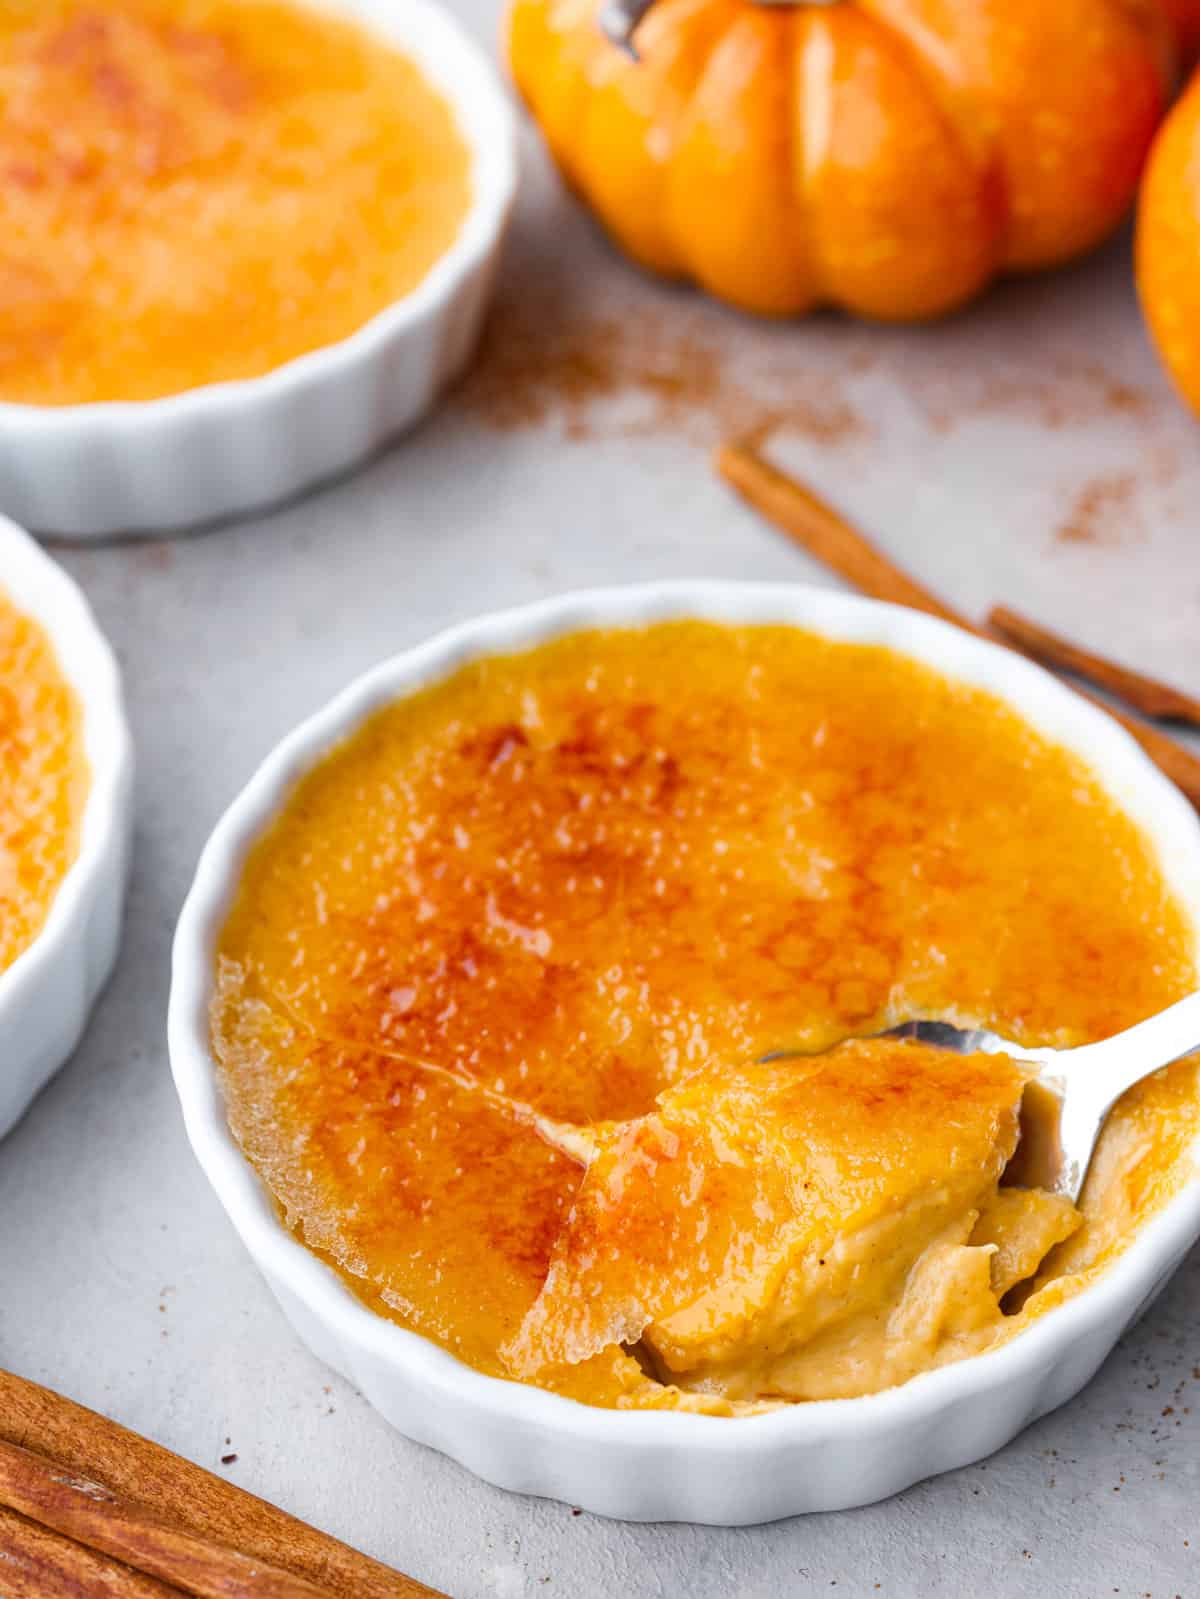 Close side view of a spoon in a ramekin of pumpkin crème brûlée.The caramelized top is cracked into with the spoon. A pumpkin and cinnamon sticks are next to the ramekins.